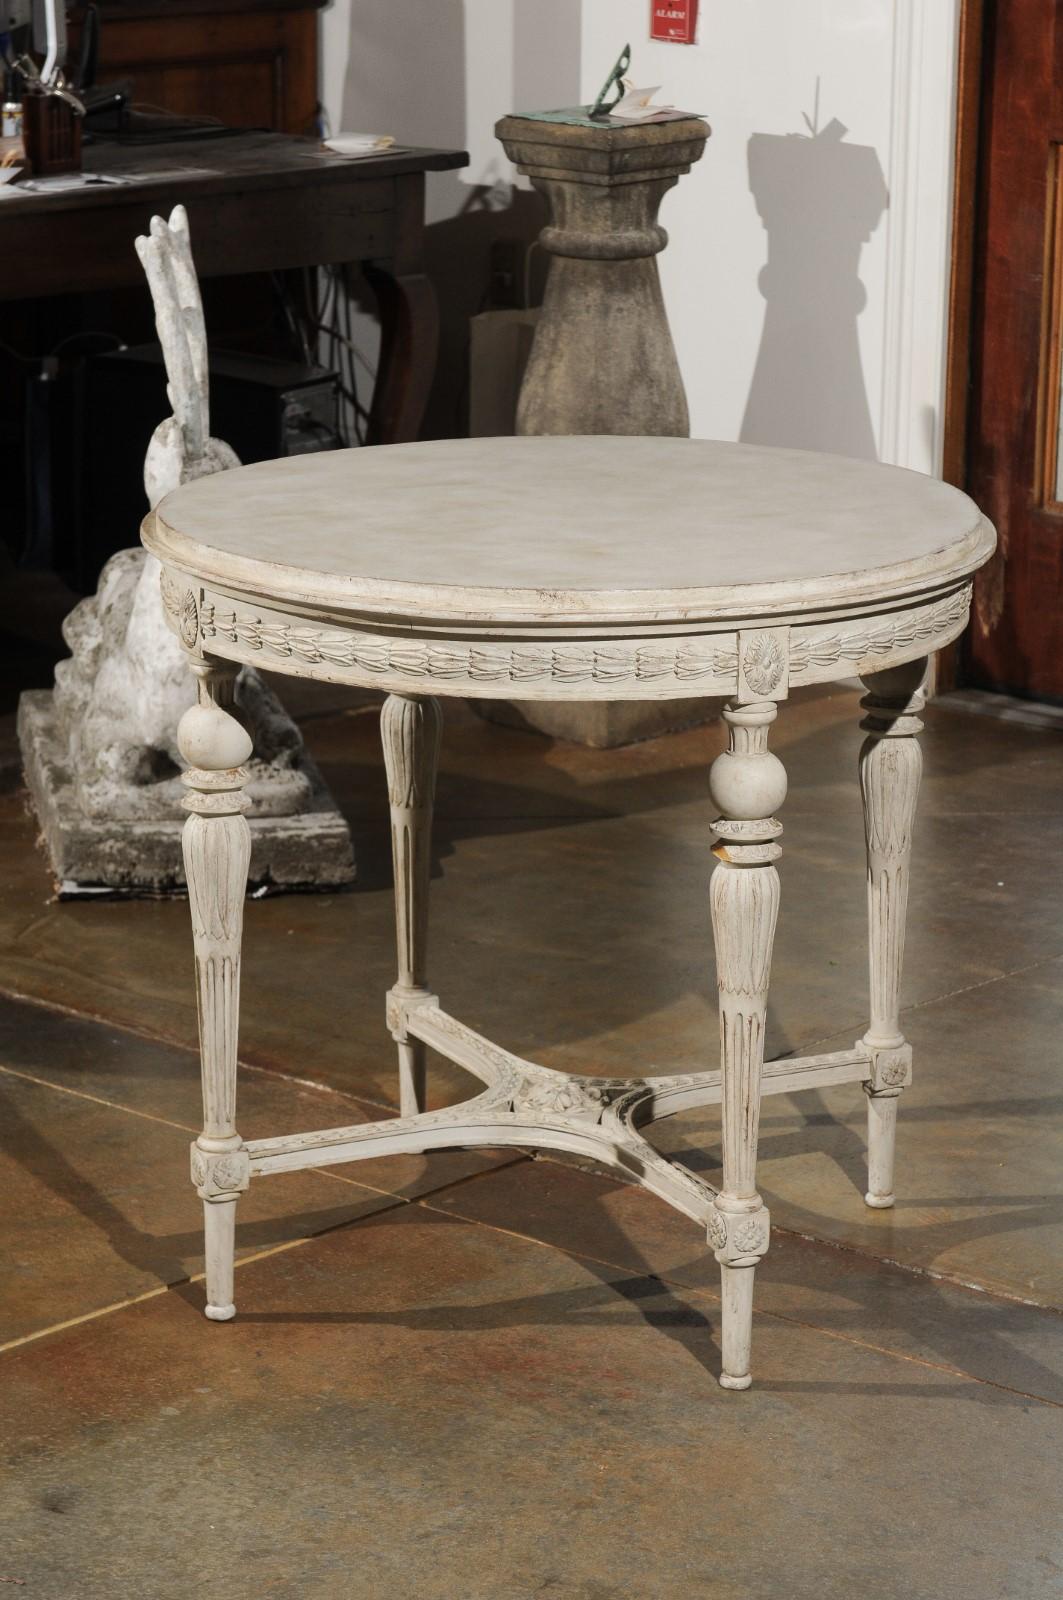 A Swedish Gustavian style painted wood round table from the 19th century, with carved apron, fluted legs and X-form cross stretcher. Born in Sweden during the 19th century, this elegant table charms us with its Gustavian inspired lines. Featuring a